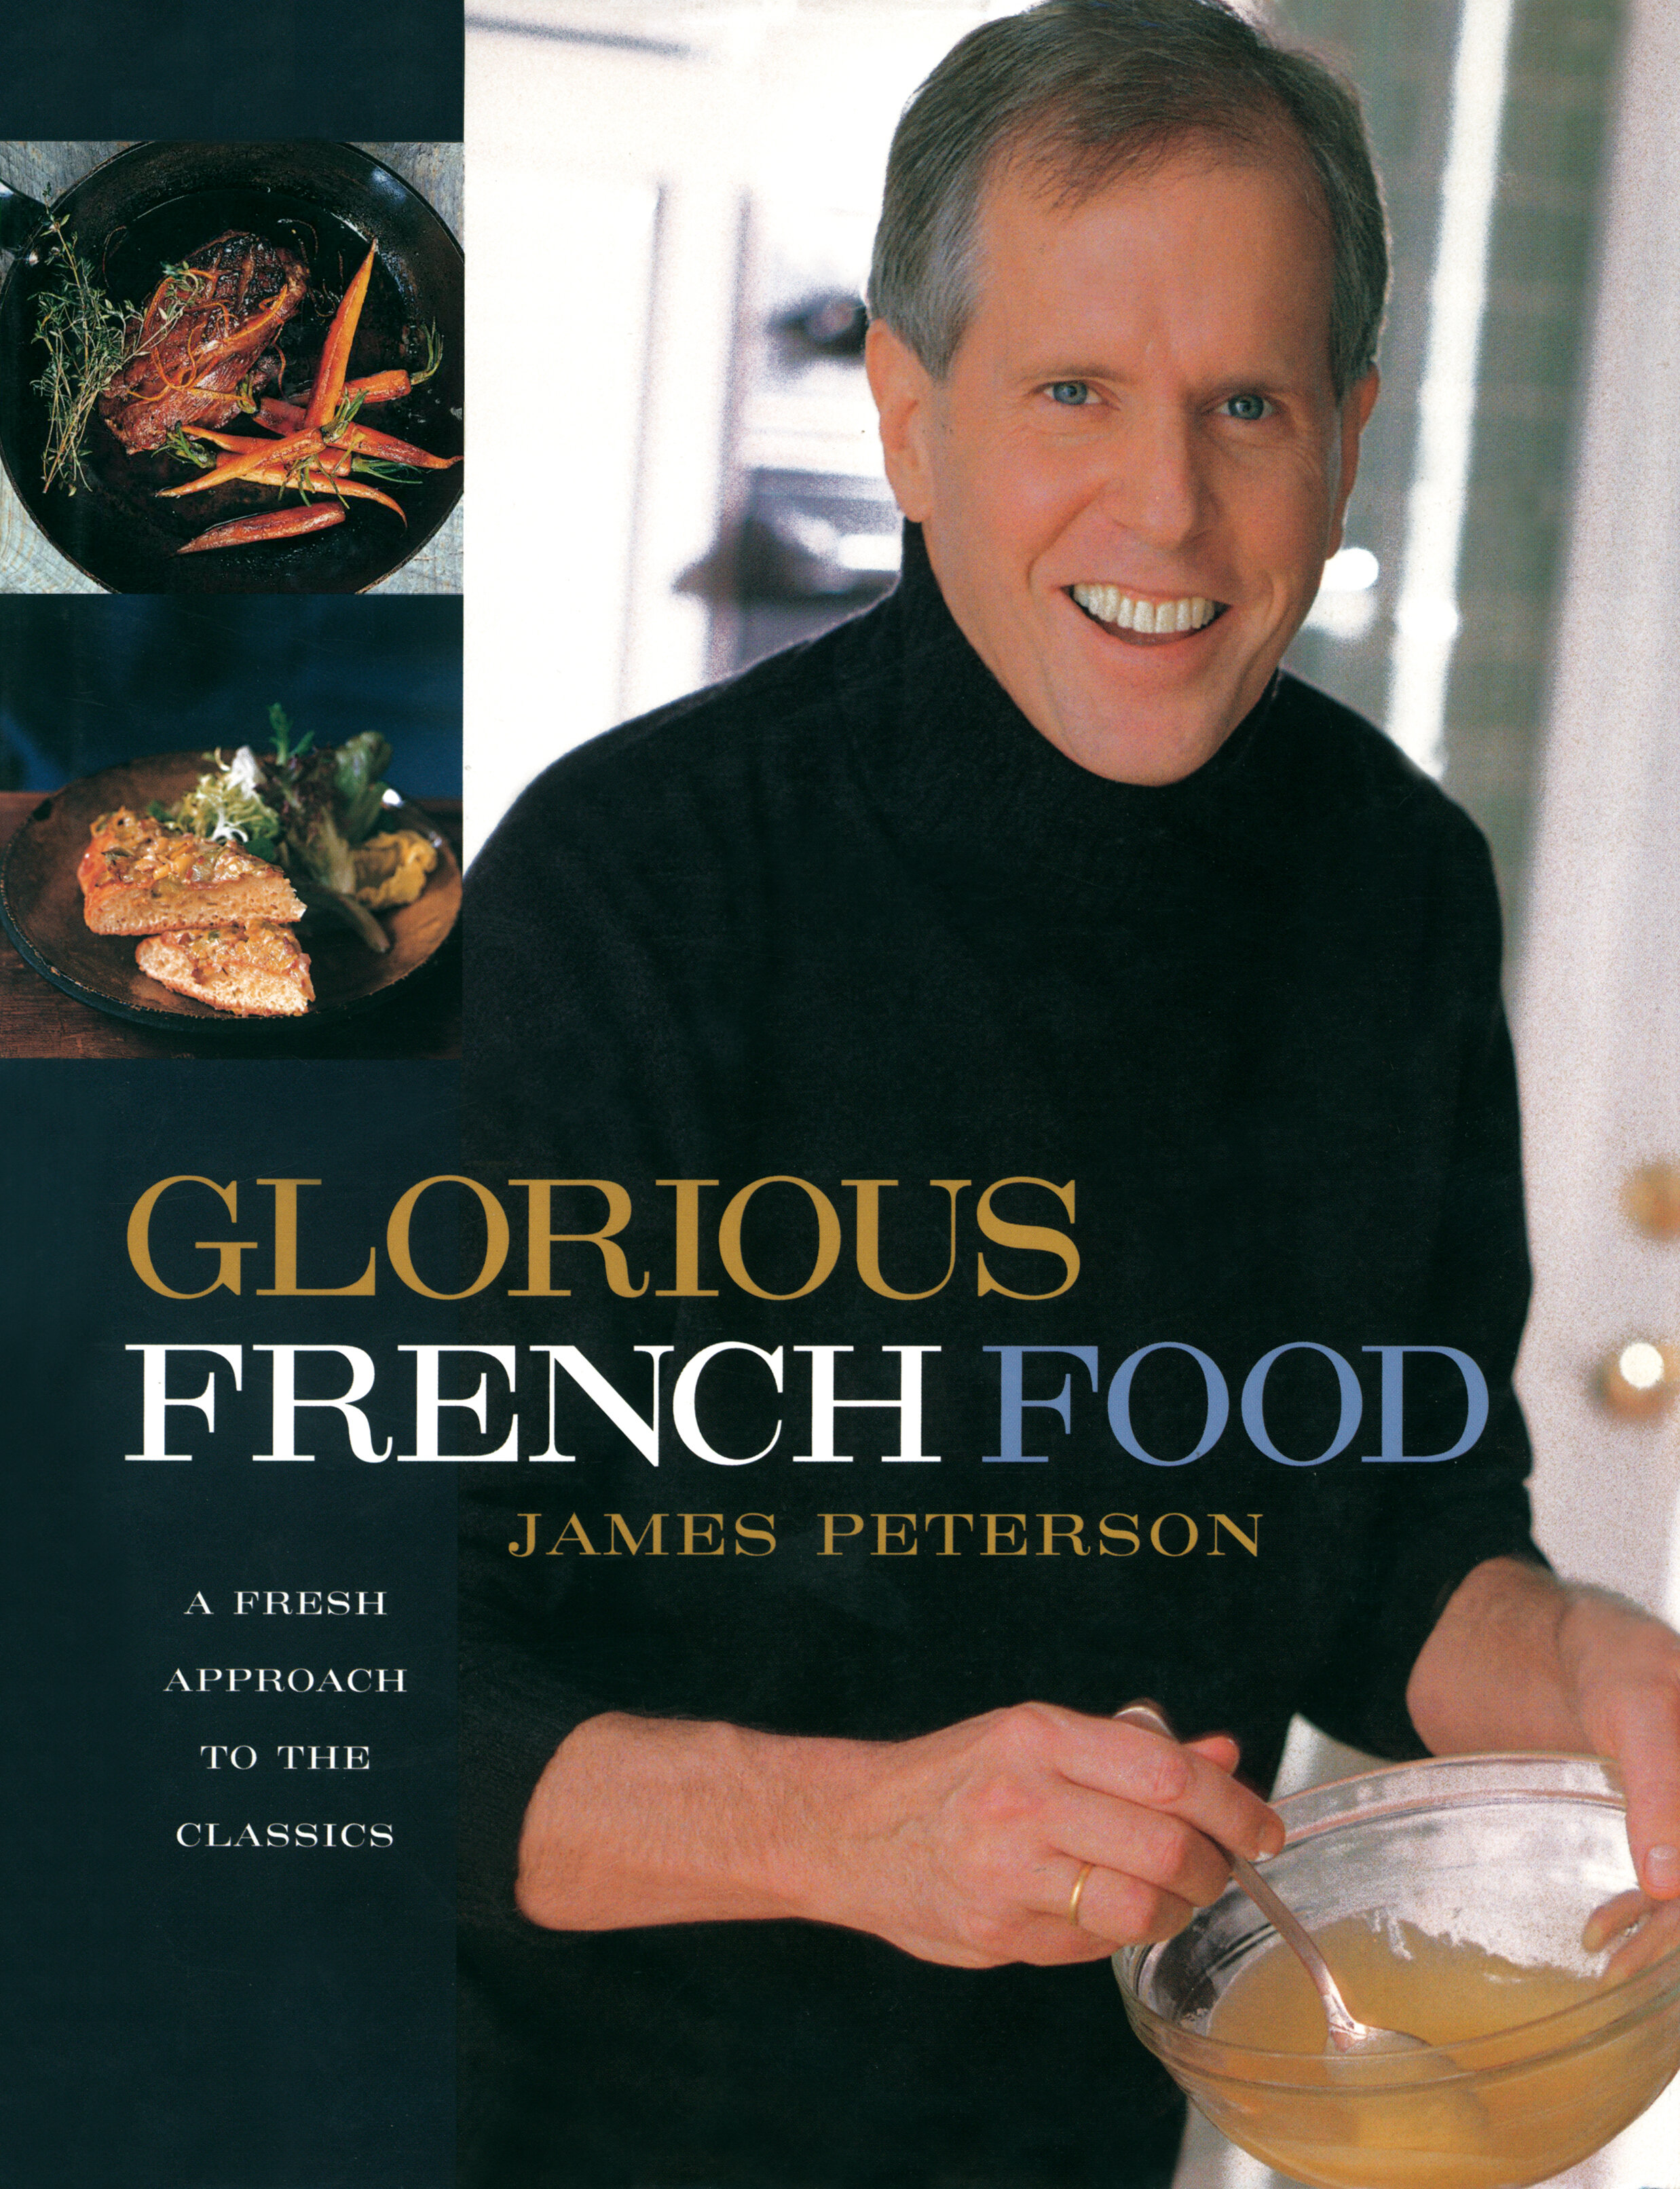 Glorious French Food by James Peterson